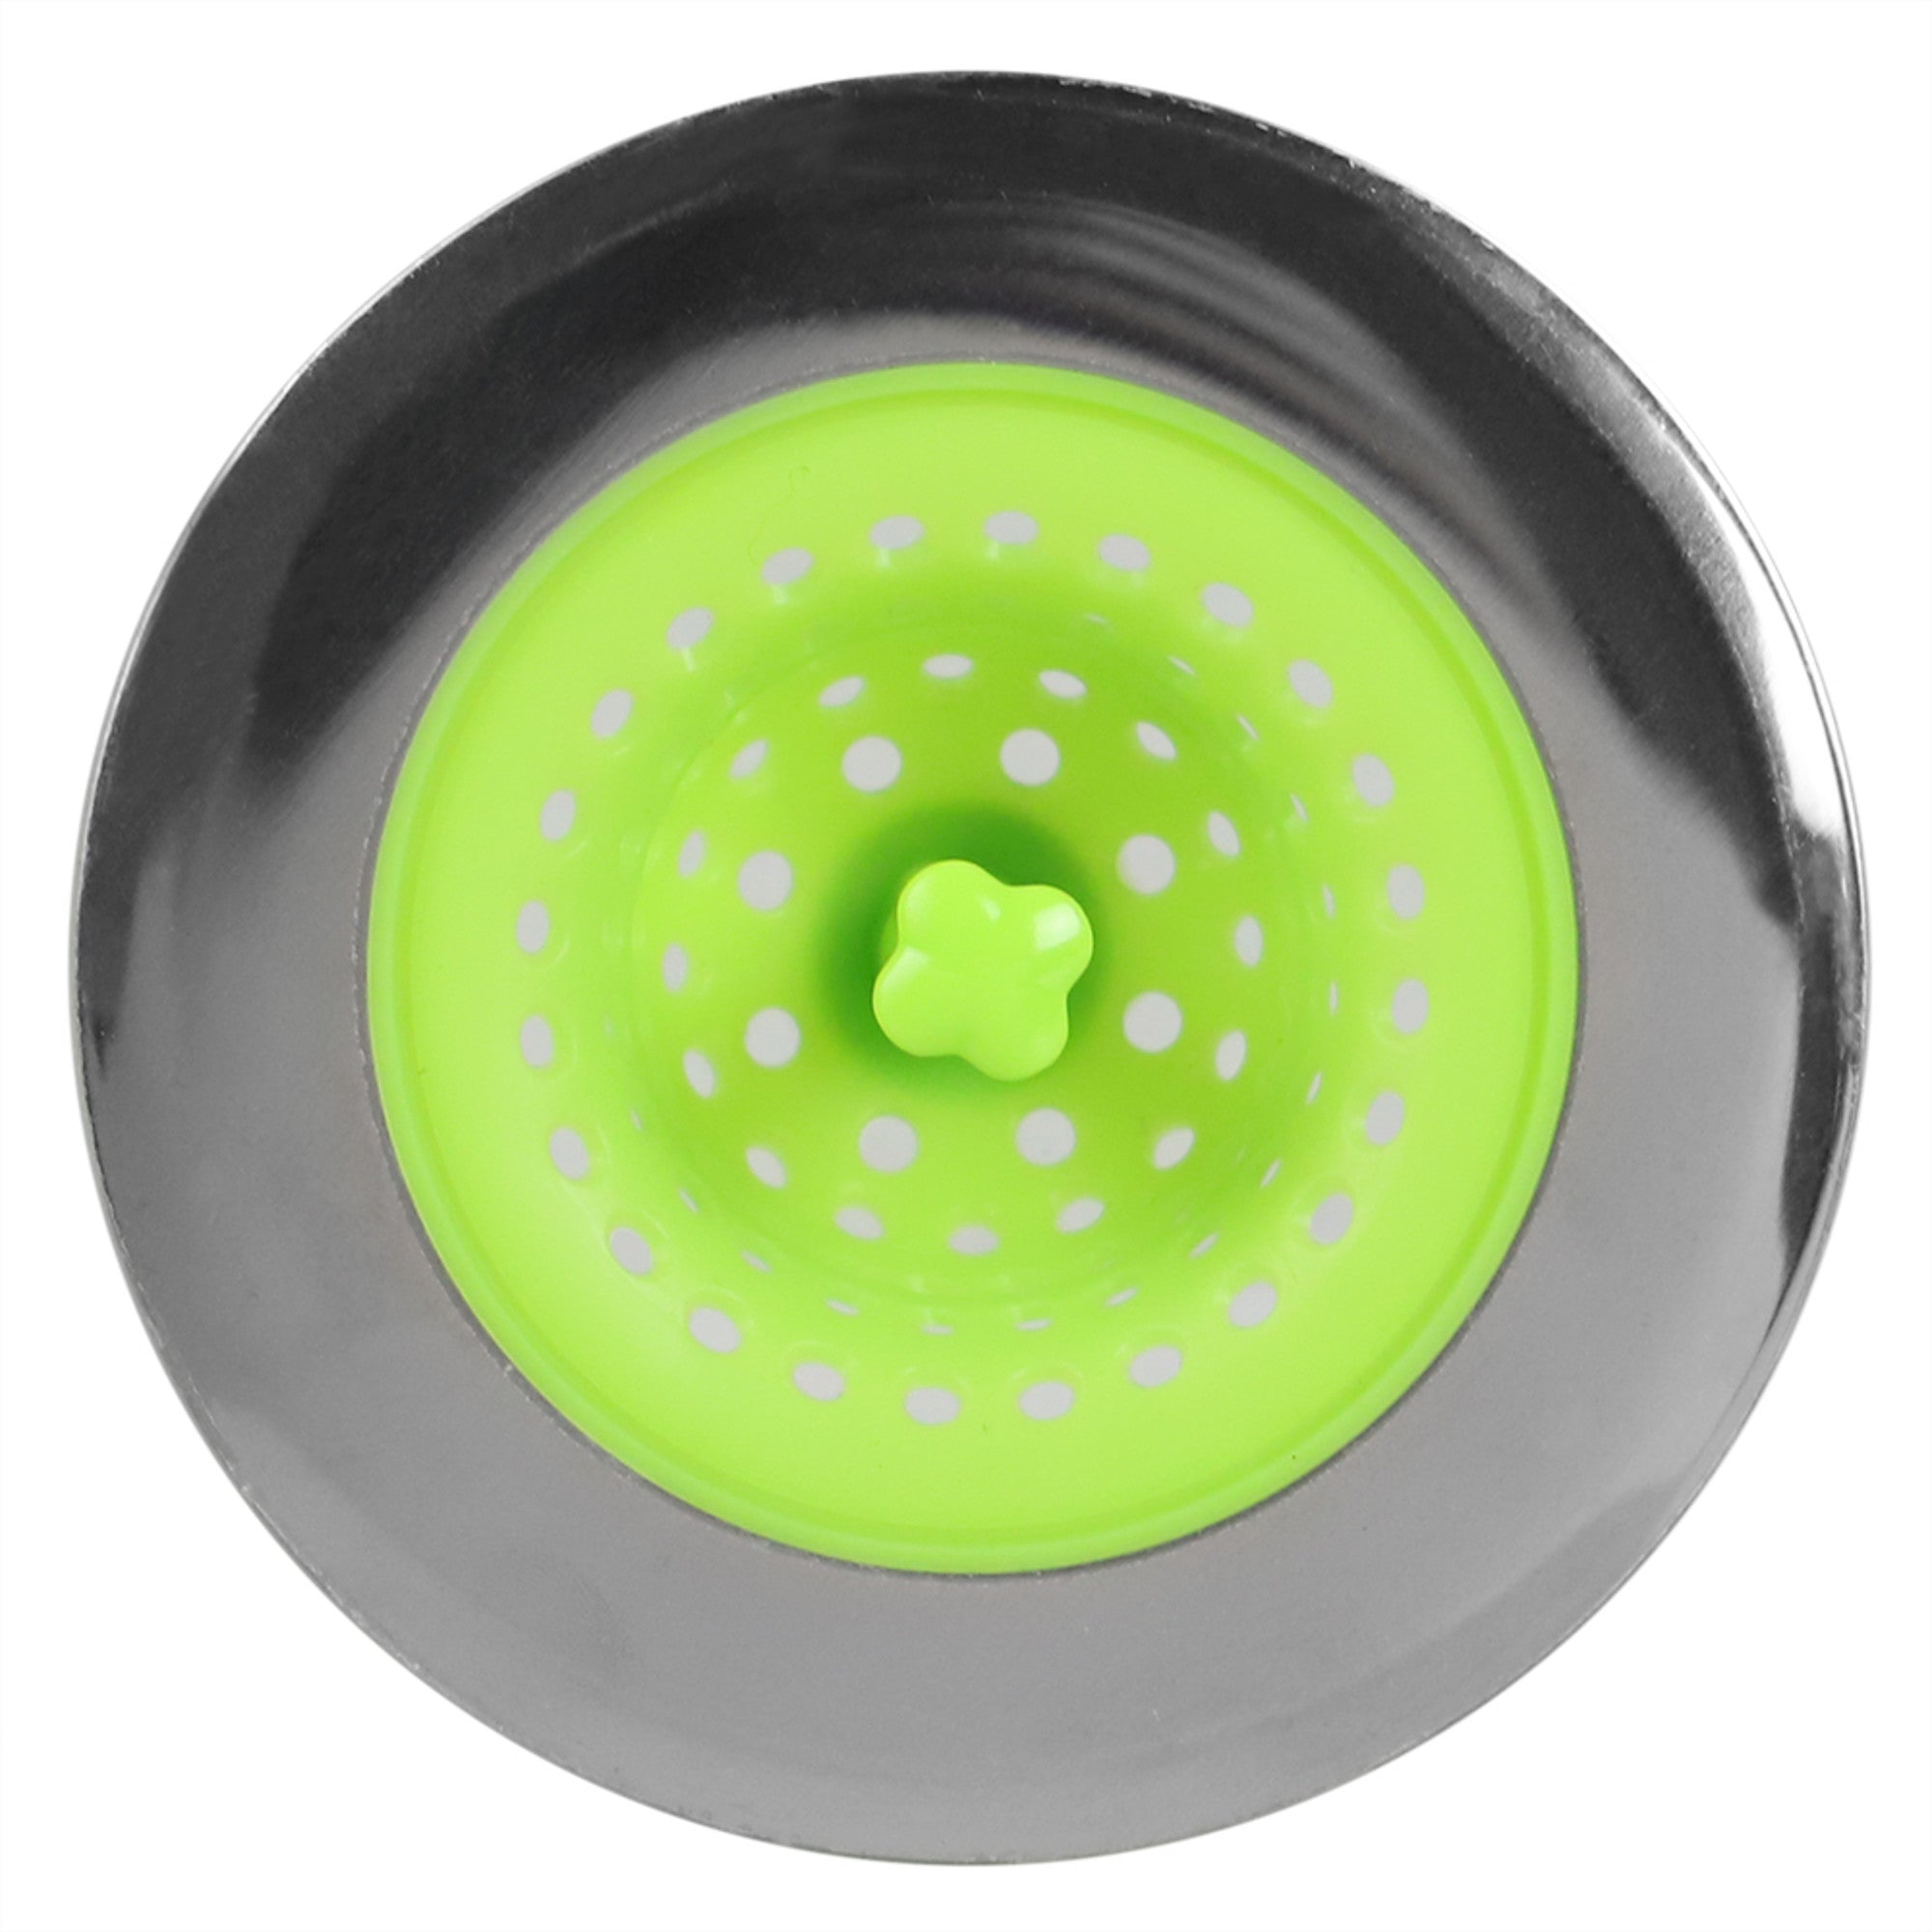 Home Basics Brights Silicone Sink Strainer with Stainless Steel Rim - Assorted Colors